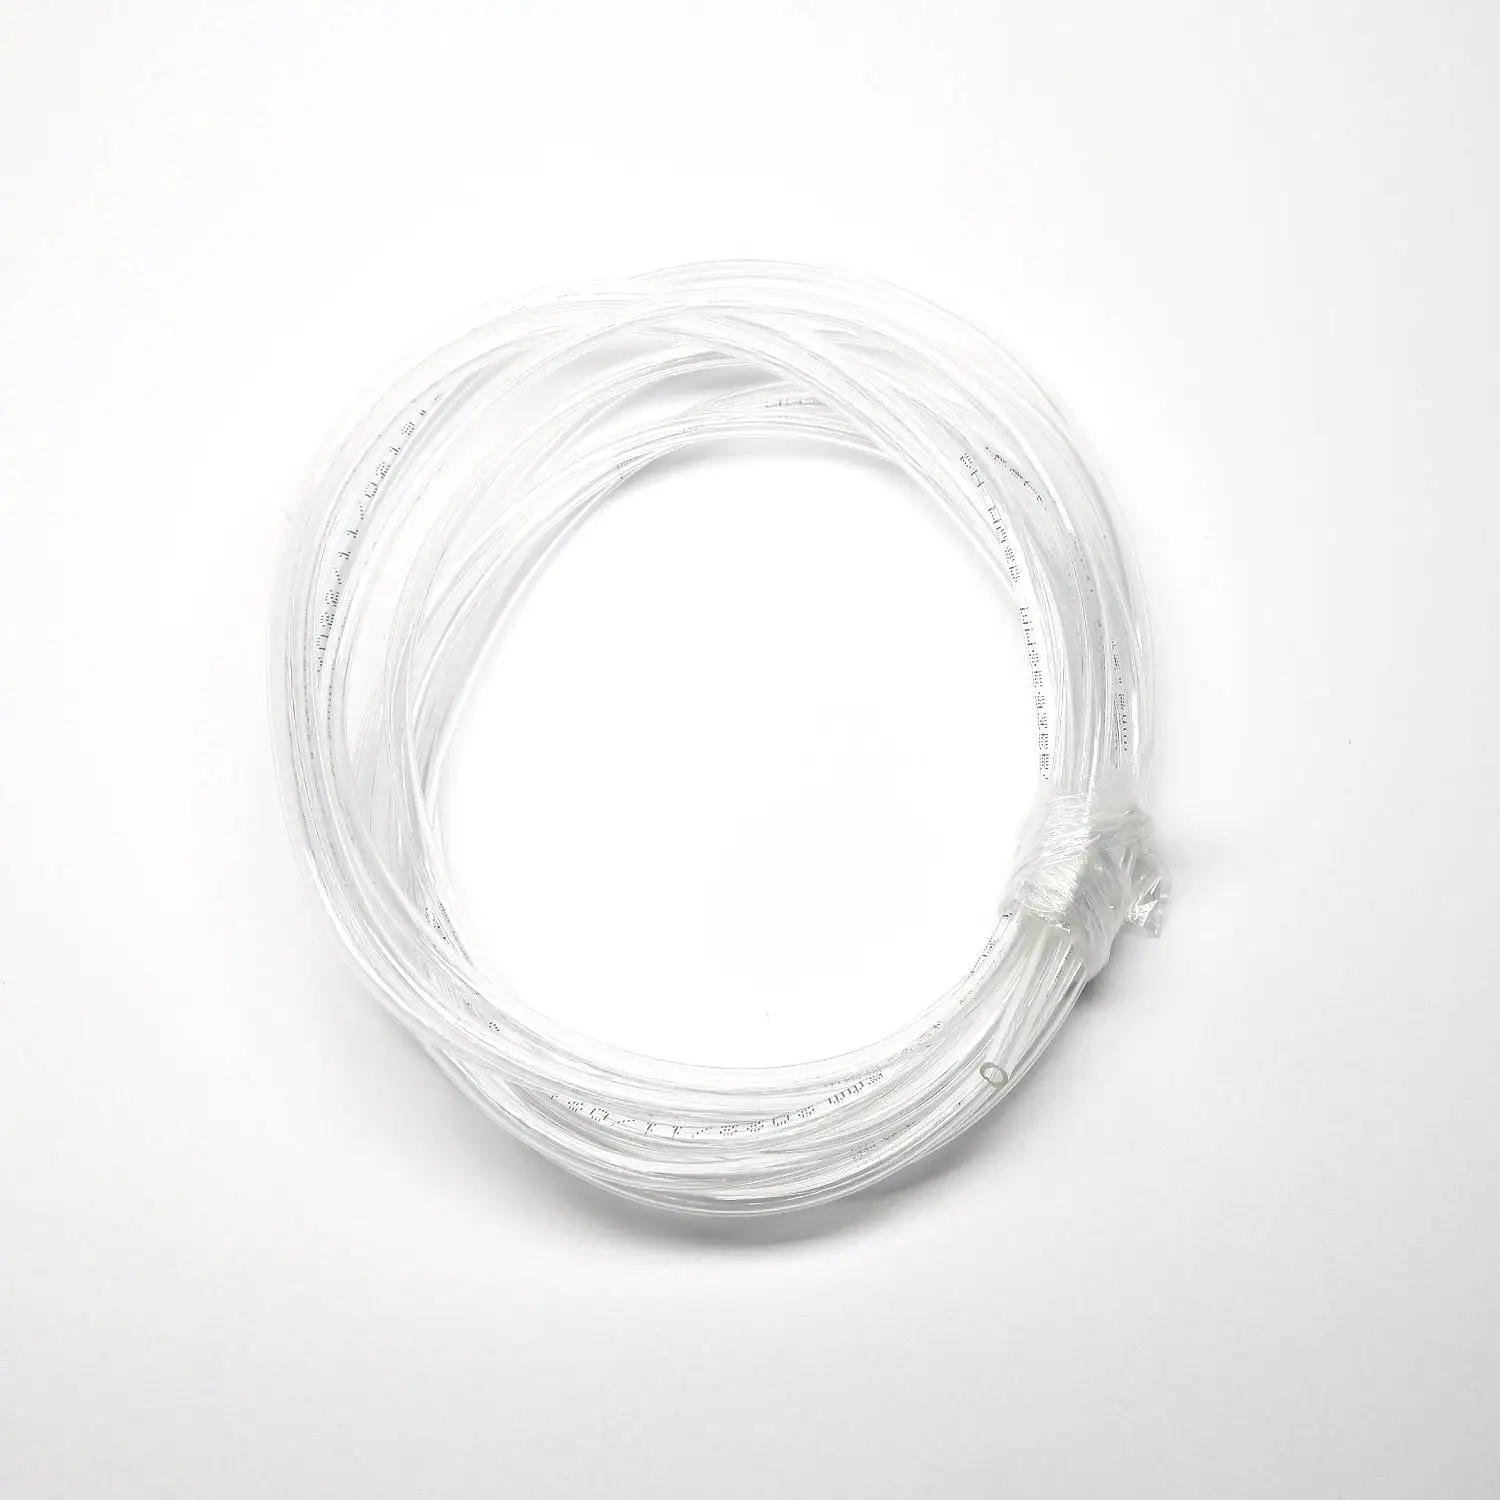 3.3 Meters PU Hose Outside 4mm Inside 2.5mm for 14AK Mig Gun Torch